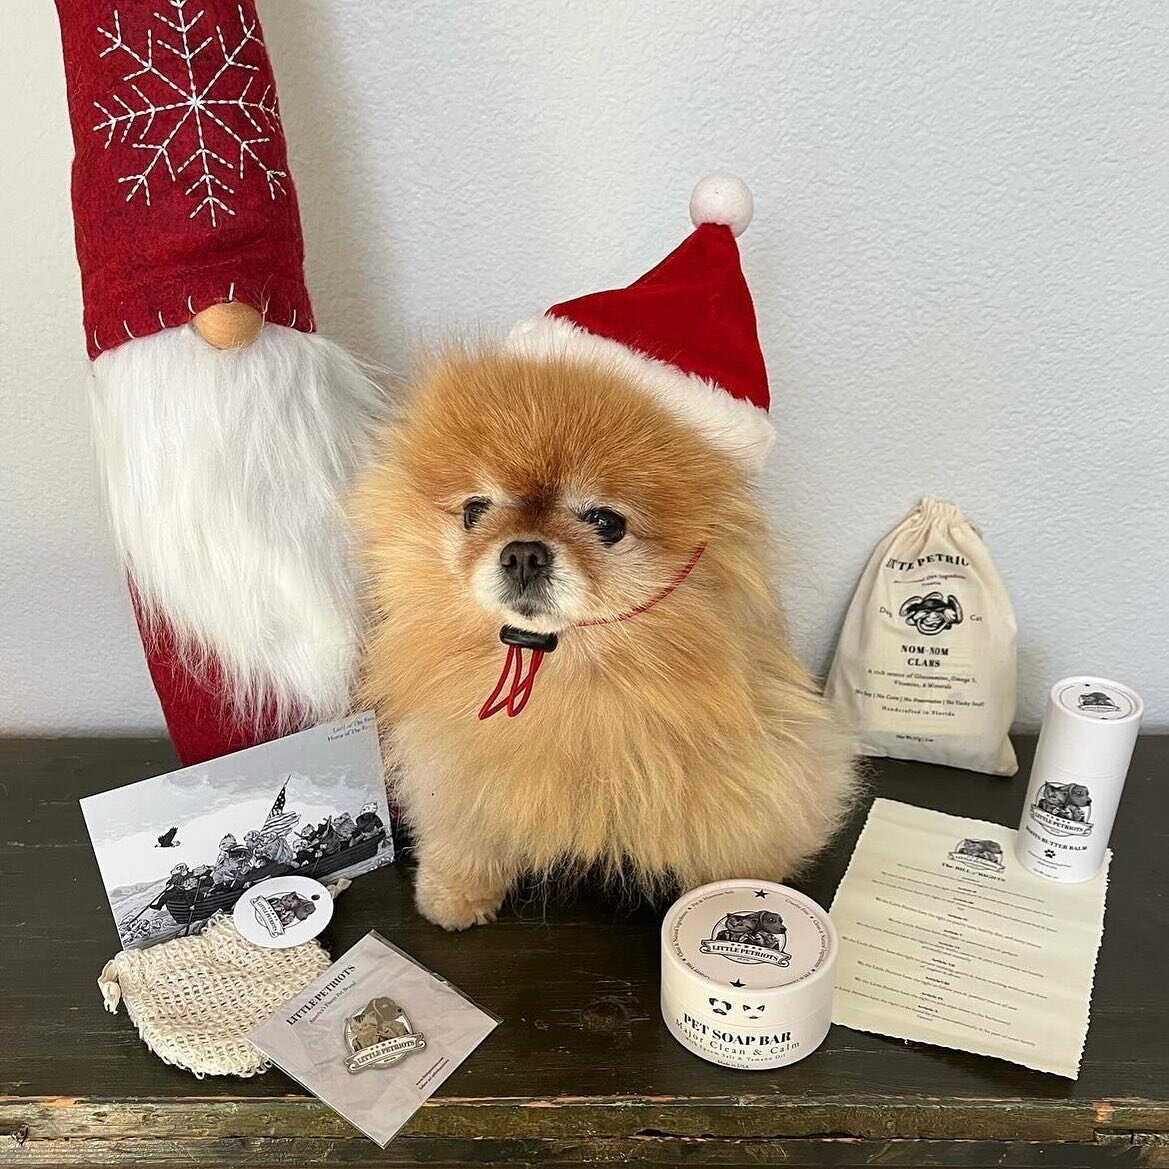 Weee! @dolliethepom is pawrfect! 🐾 she&rsquo;d be a great helper for Santa 🎅🏻 working on the naughty/nice list 📝 this year 🎄🎁